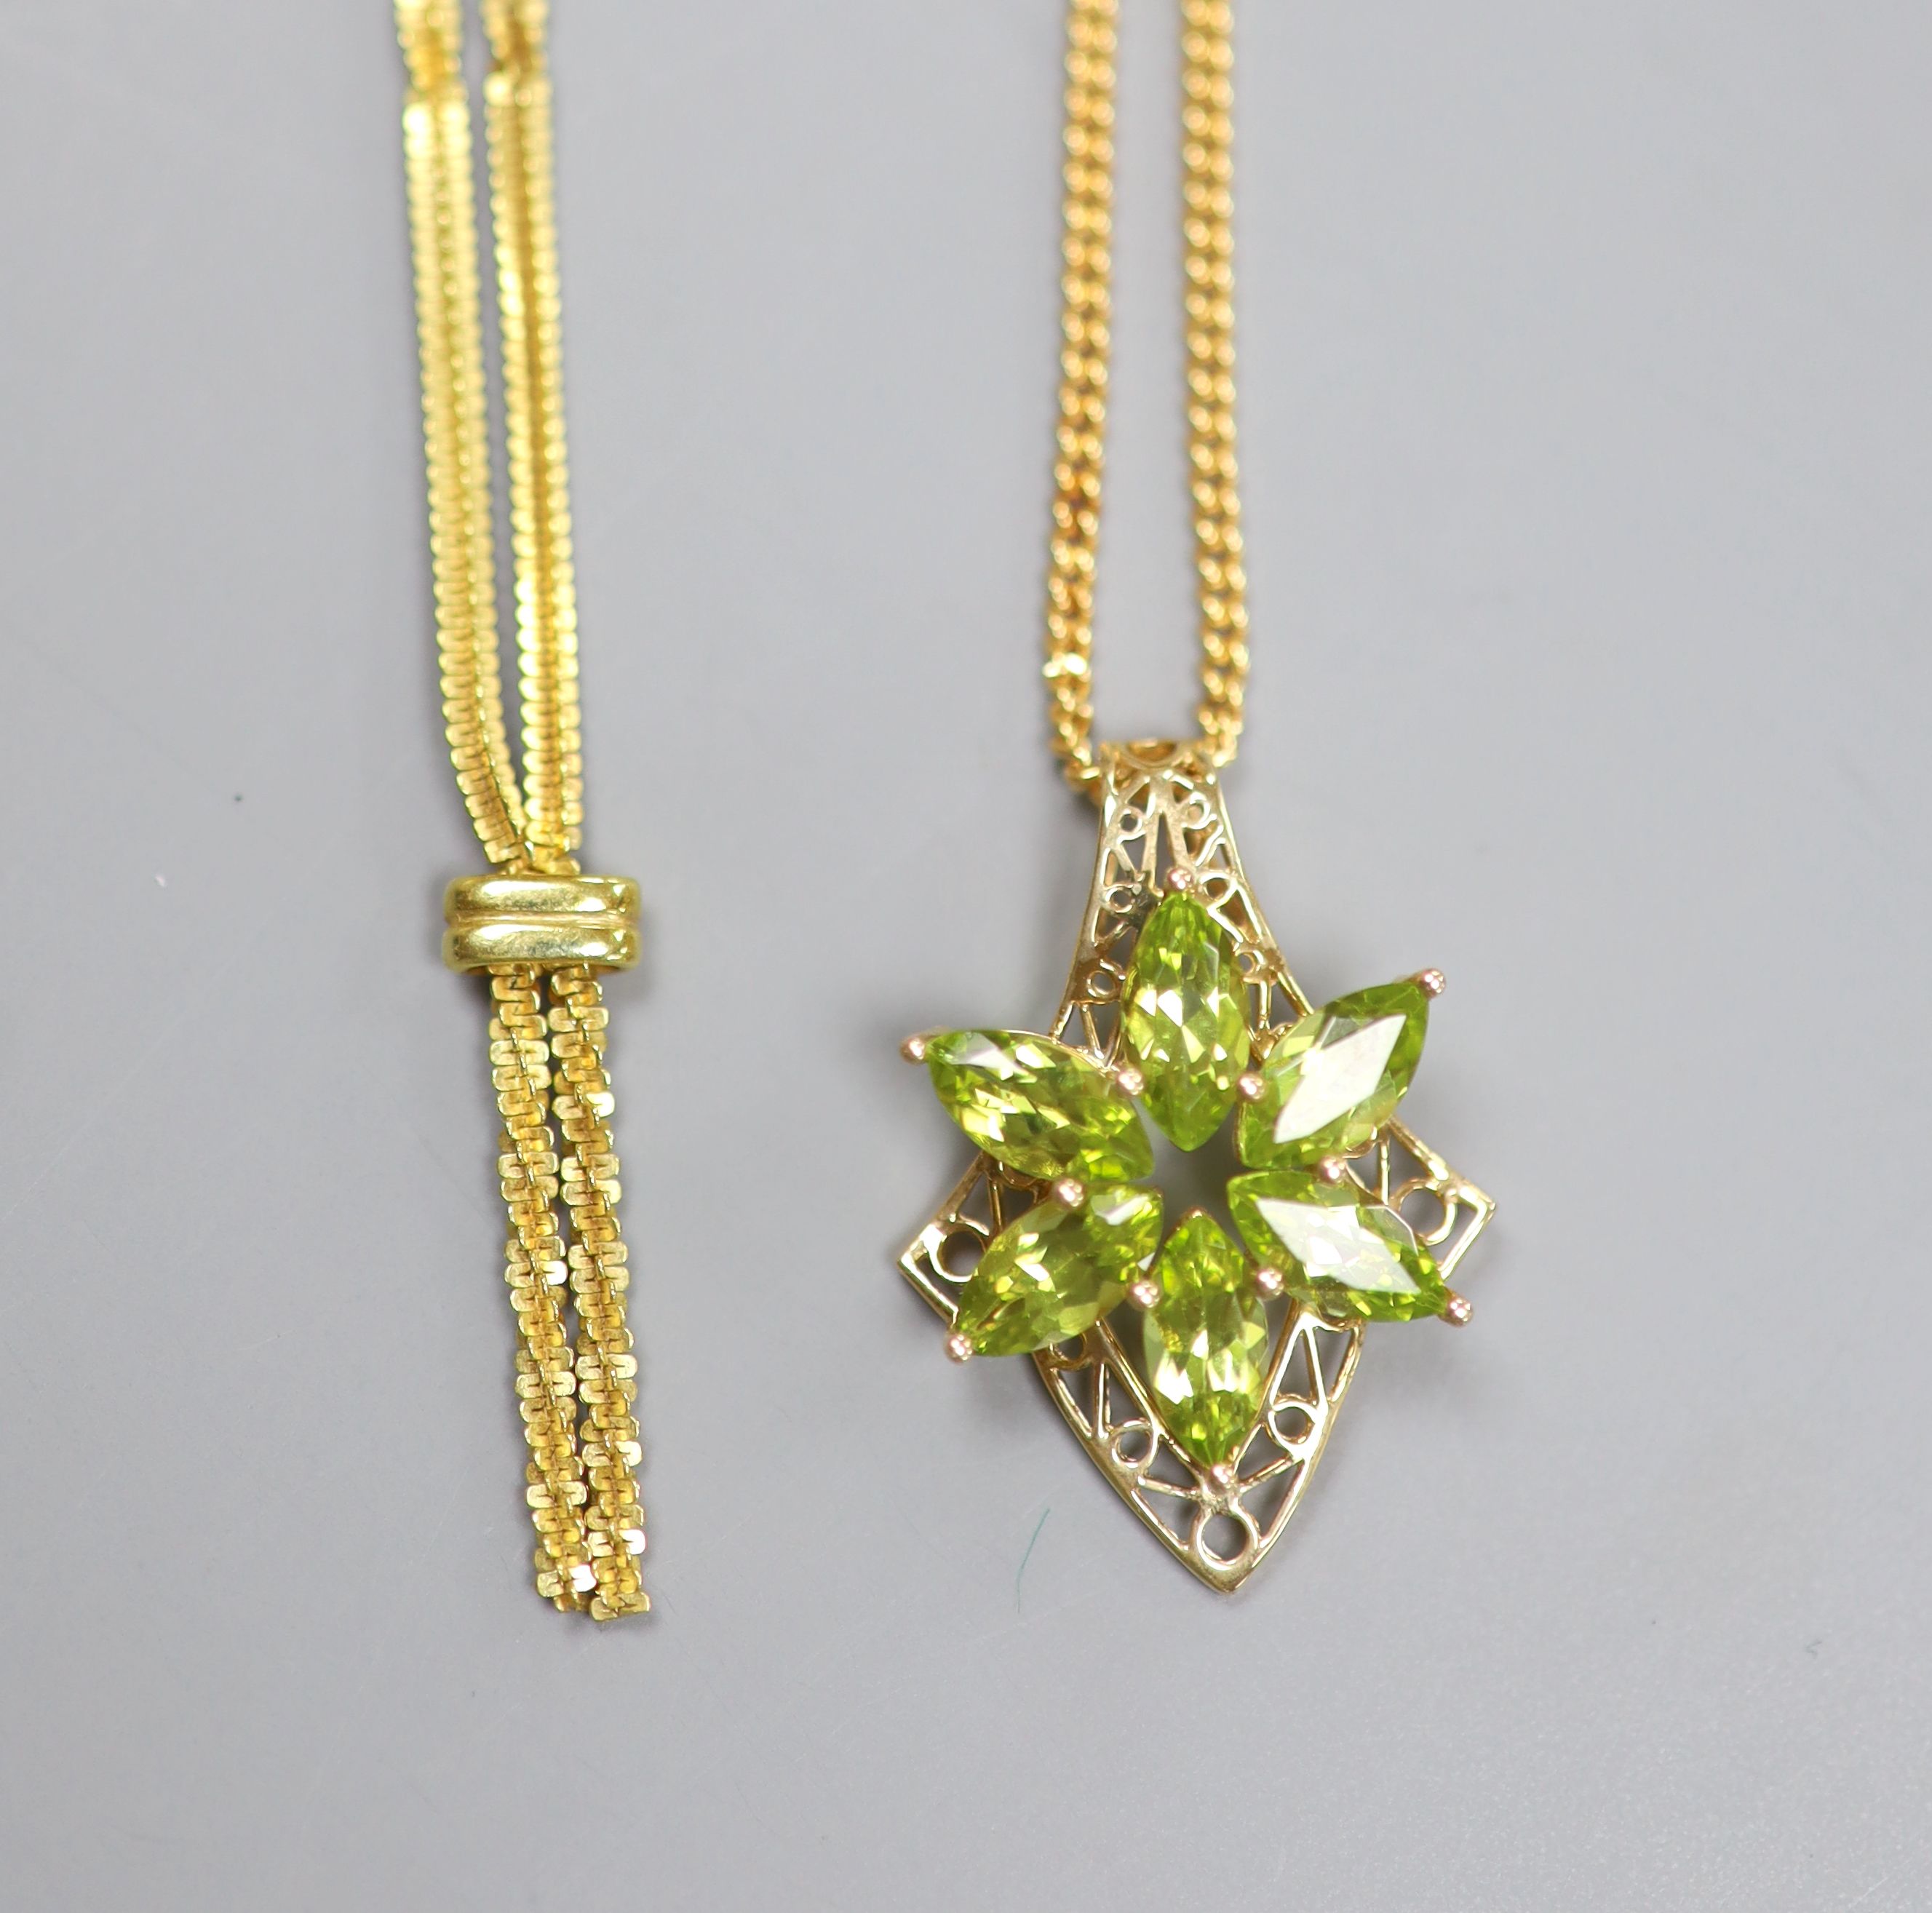 An Italian 9ct gold necklace and a 9ct gold and peridot-set necklace